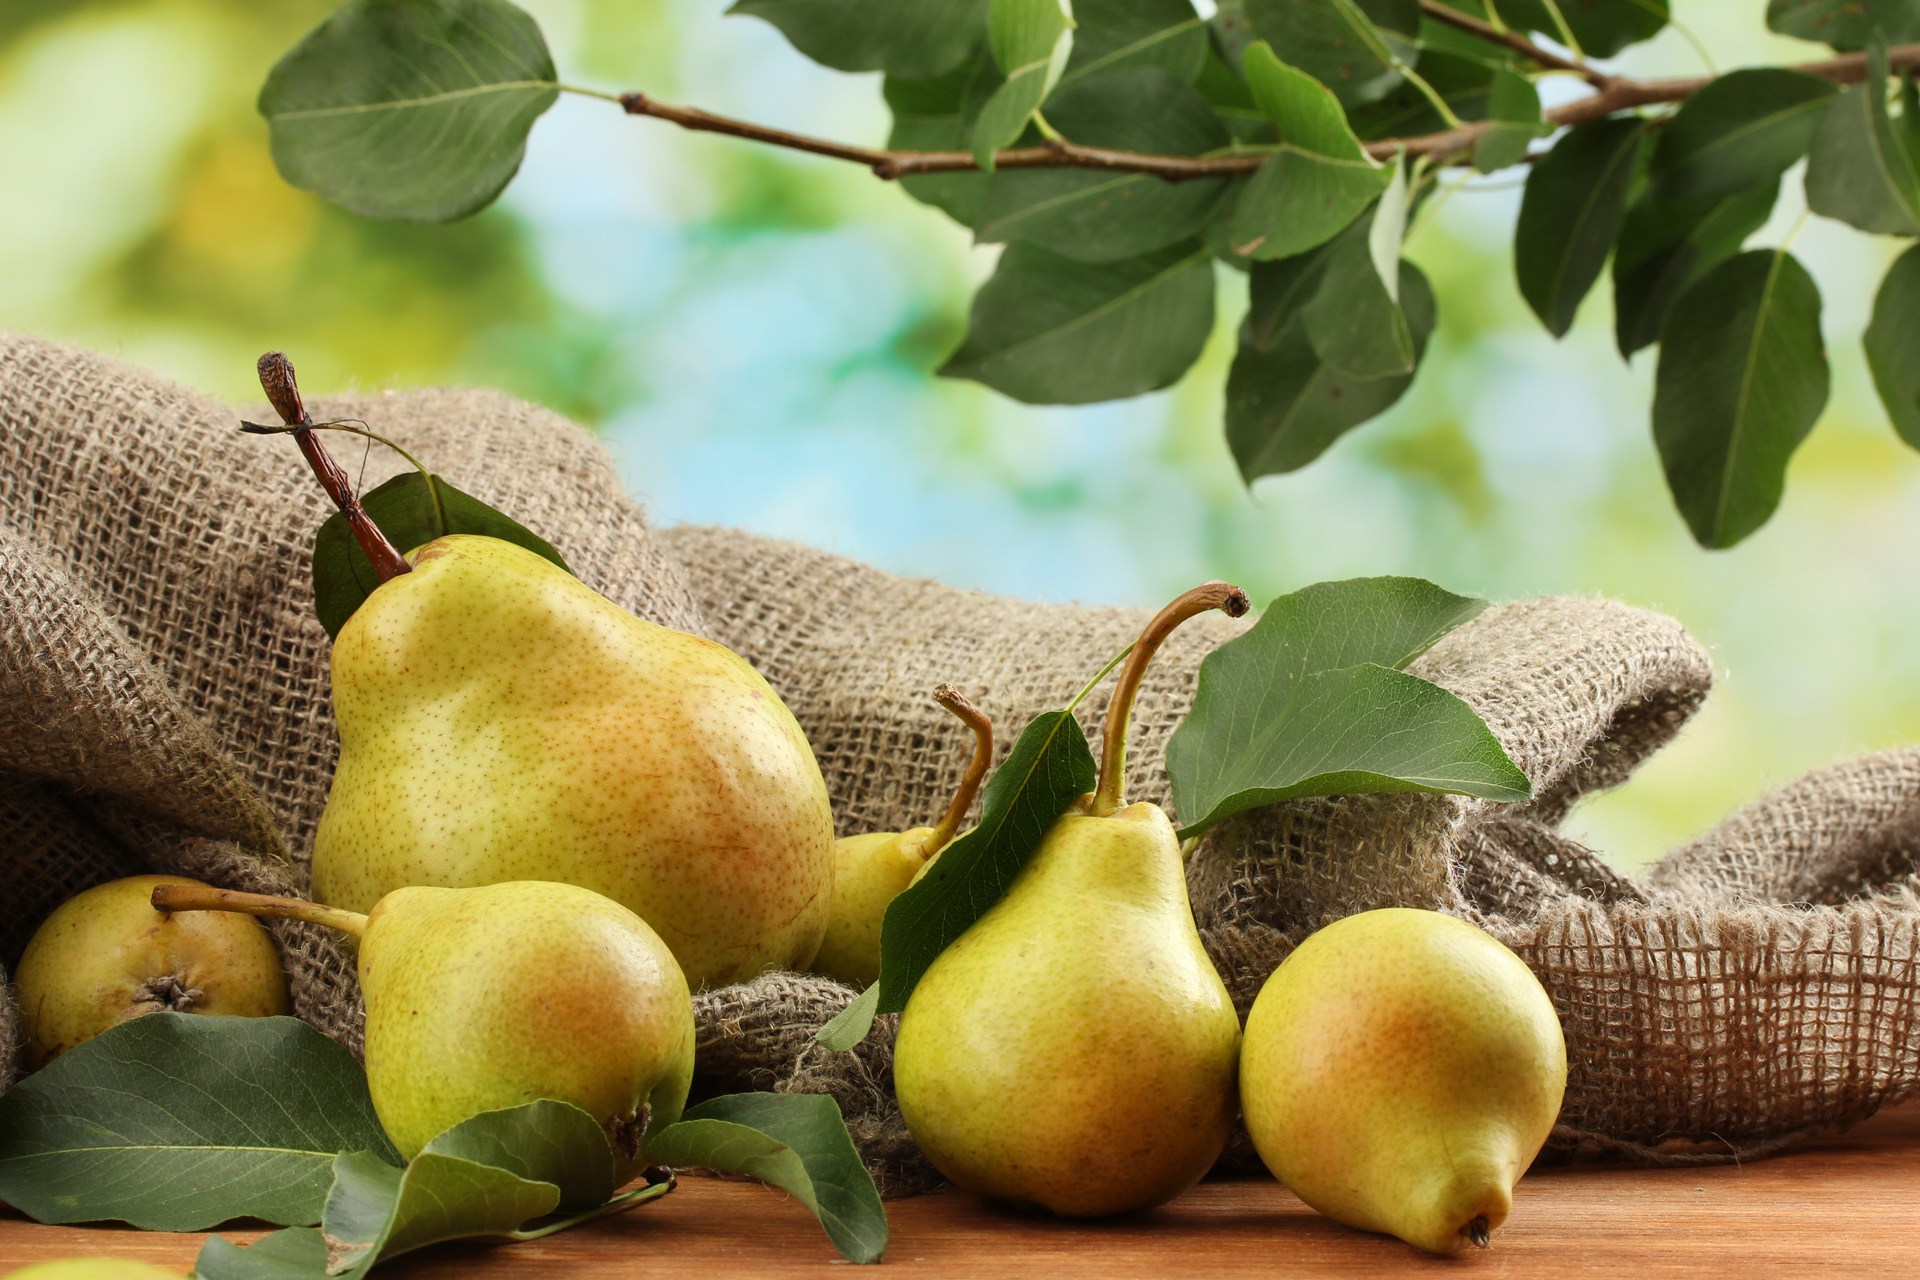 Do you know pear benefits?